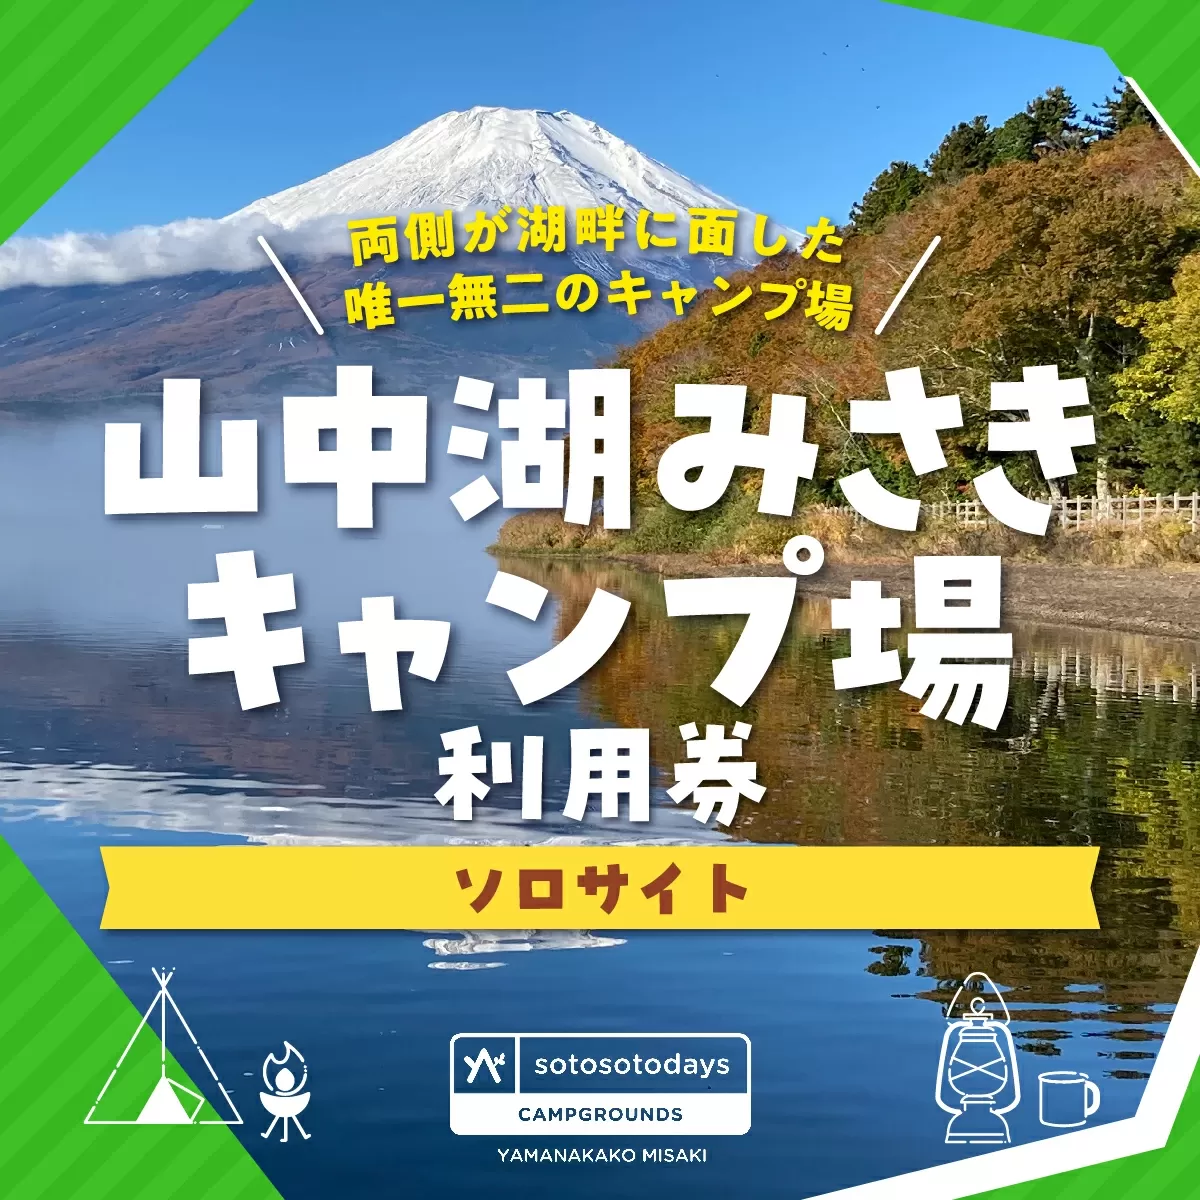 sotosotodays CAMPGROUNDS 山中湖みさき（ソロサイト） ふるさと納税 キャンプ キャンプ場 フリー 区画 電源サイト ソロキャンプ 山梨県 山中湖 送料無料 YAE003